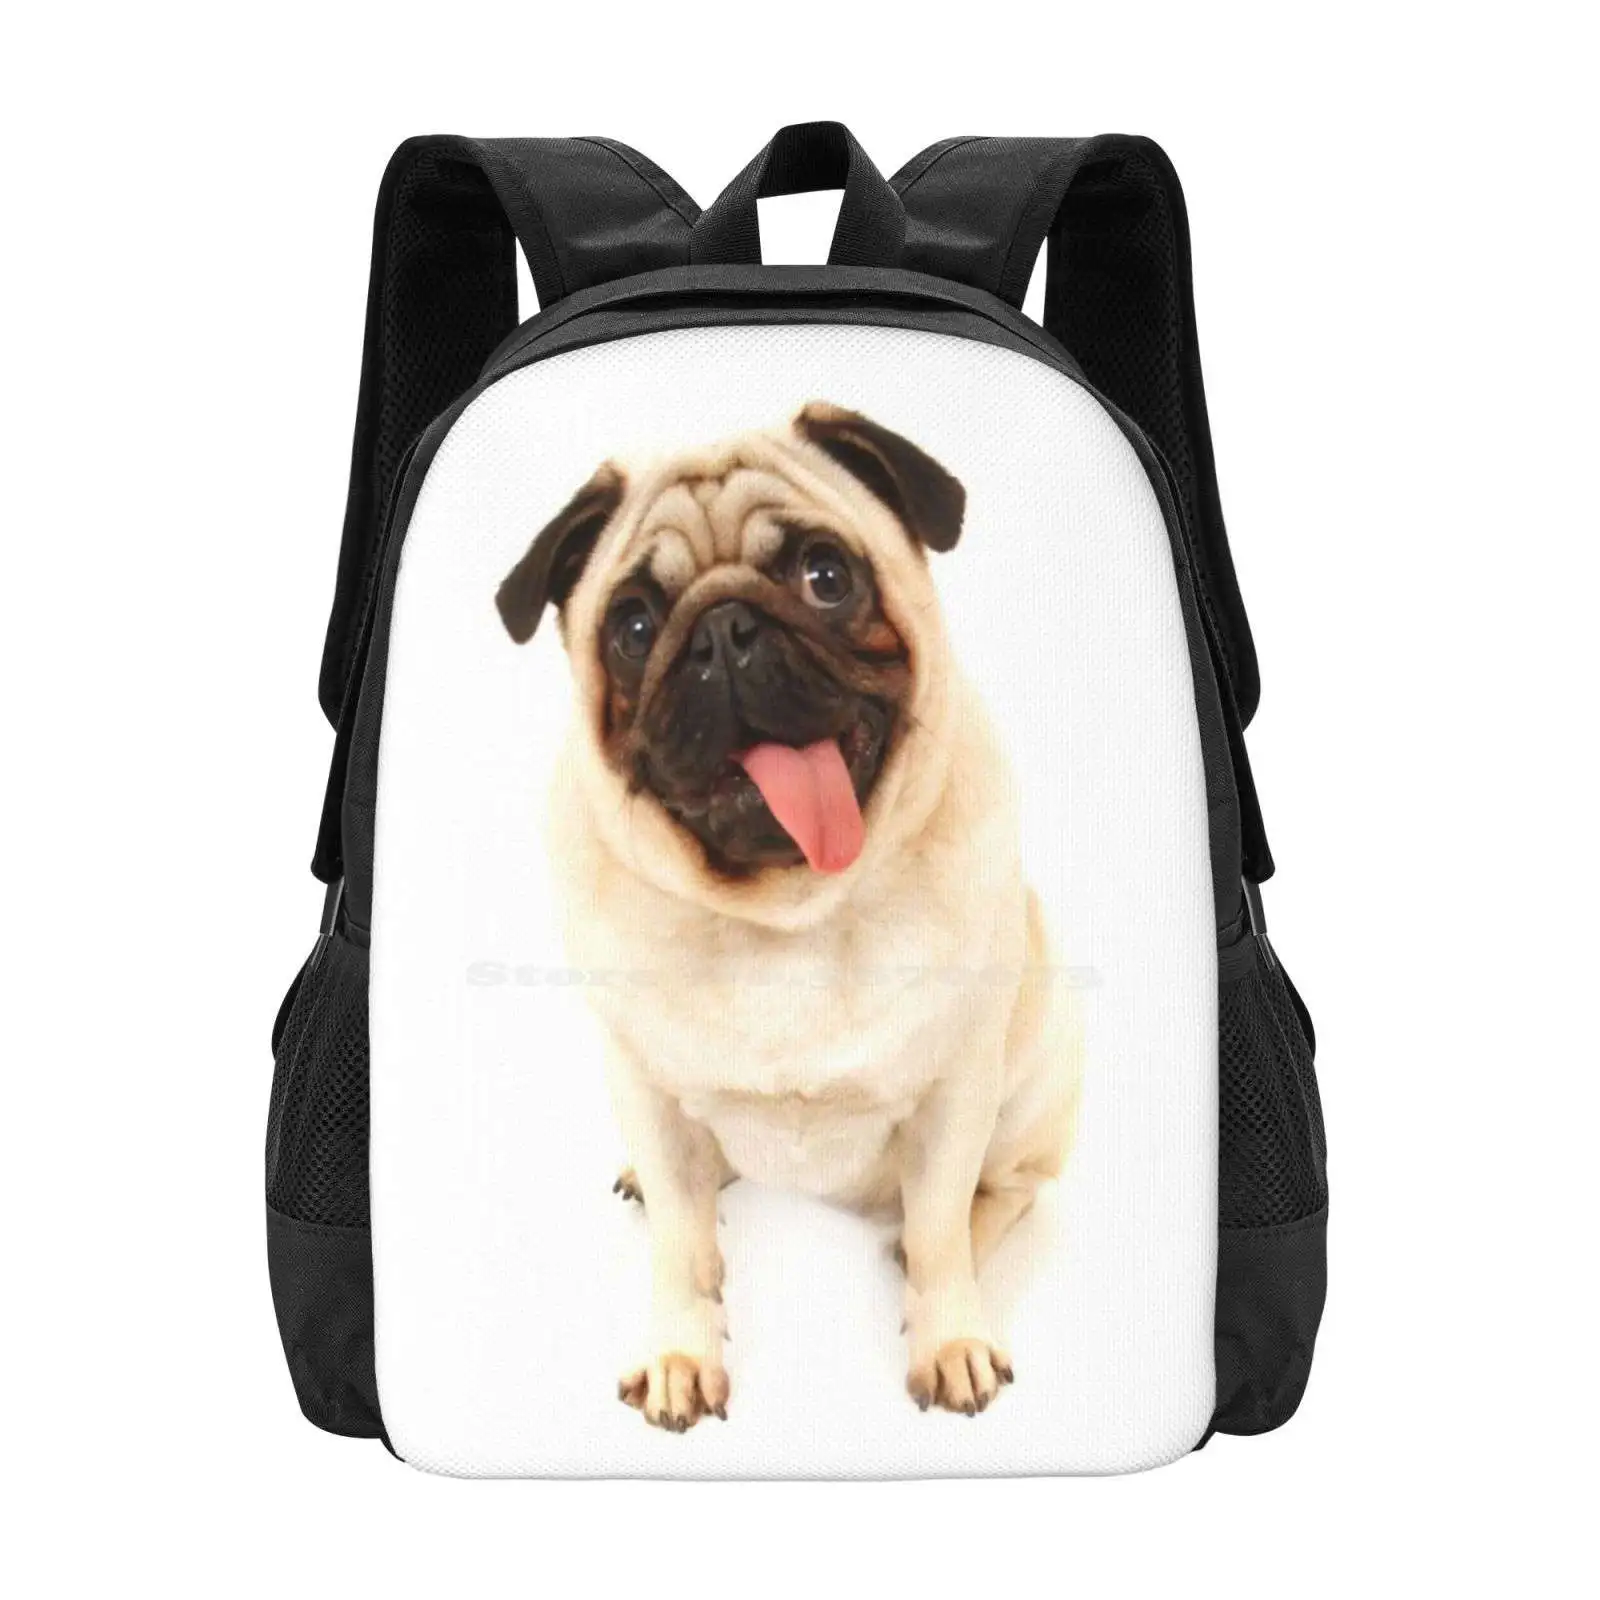 

Pug Hot Sale Backpack Fashion Bags Cute Tumblr Love Dogs Puppy Pups Pets Furry Animals Adorable Funny Pugs Pug Life